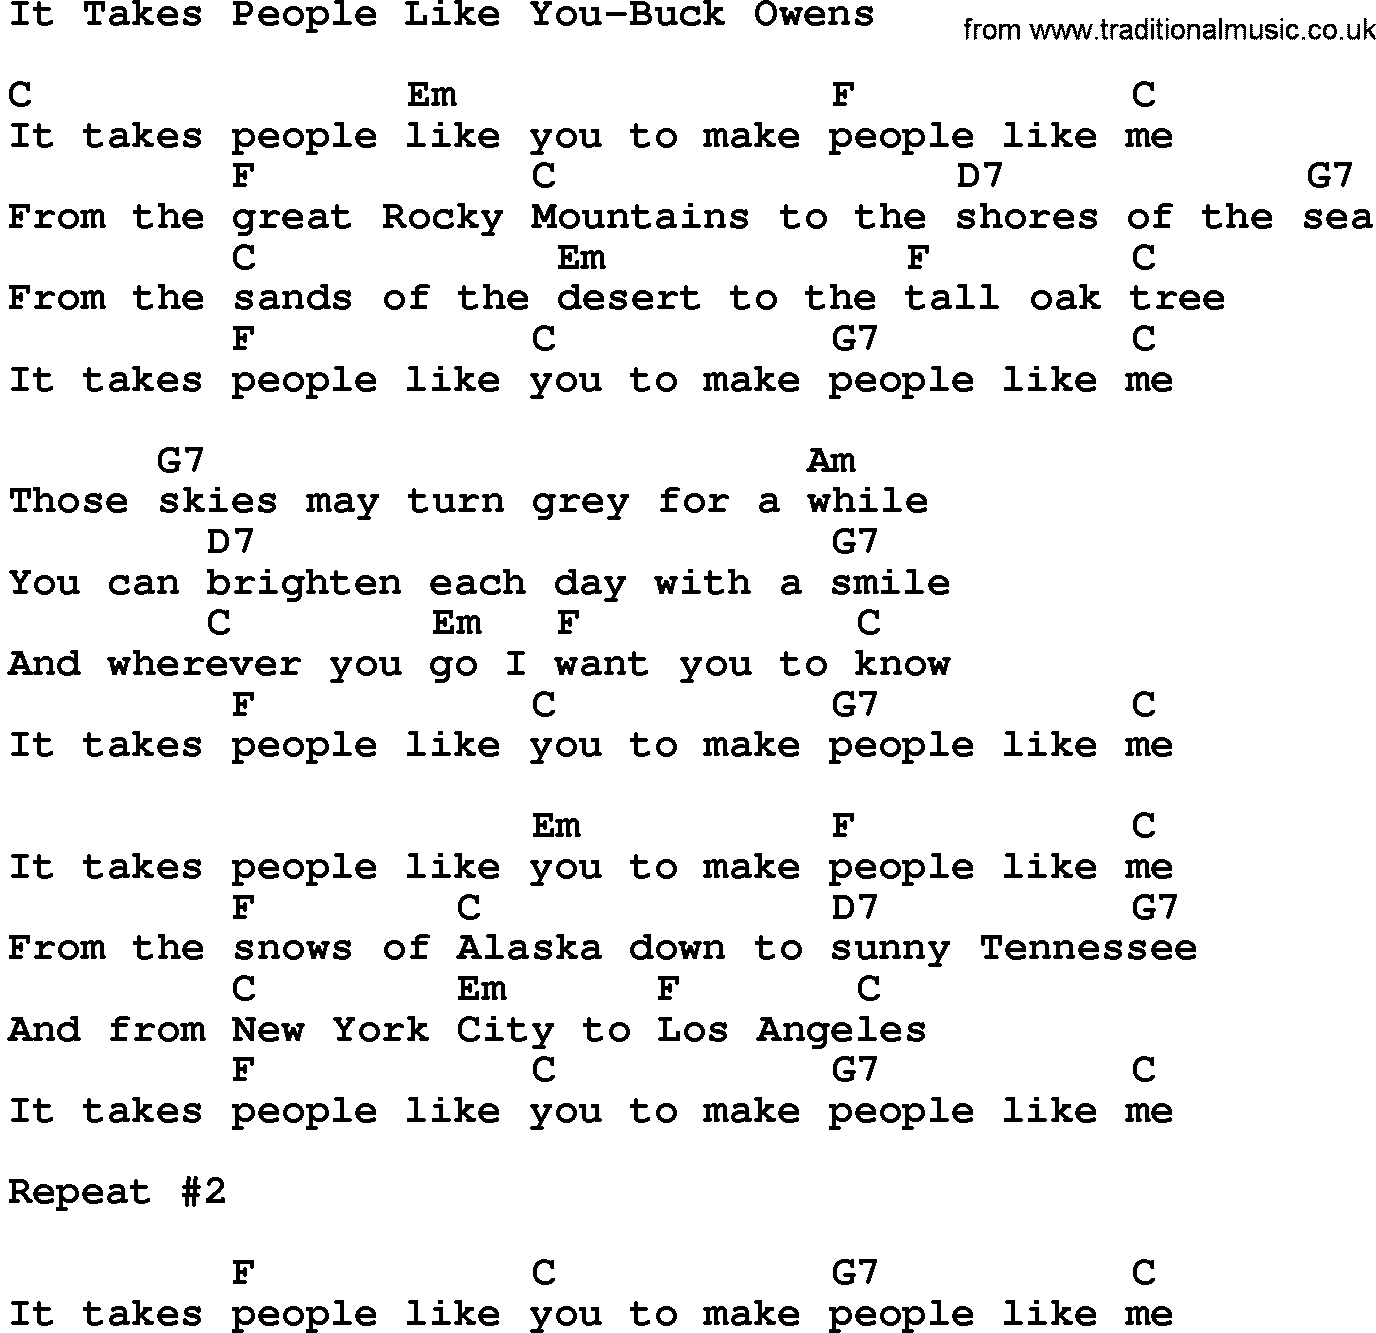 Country music song: It Takes People Like You-Buck Owens lyrics and chords